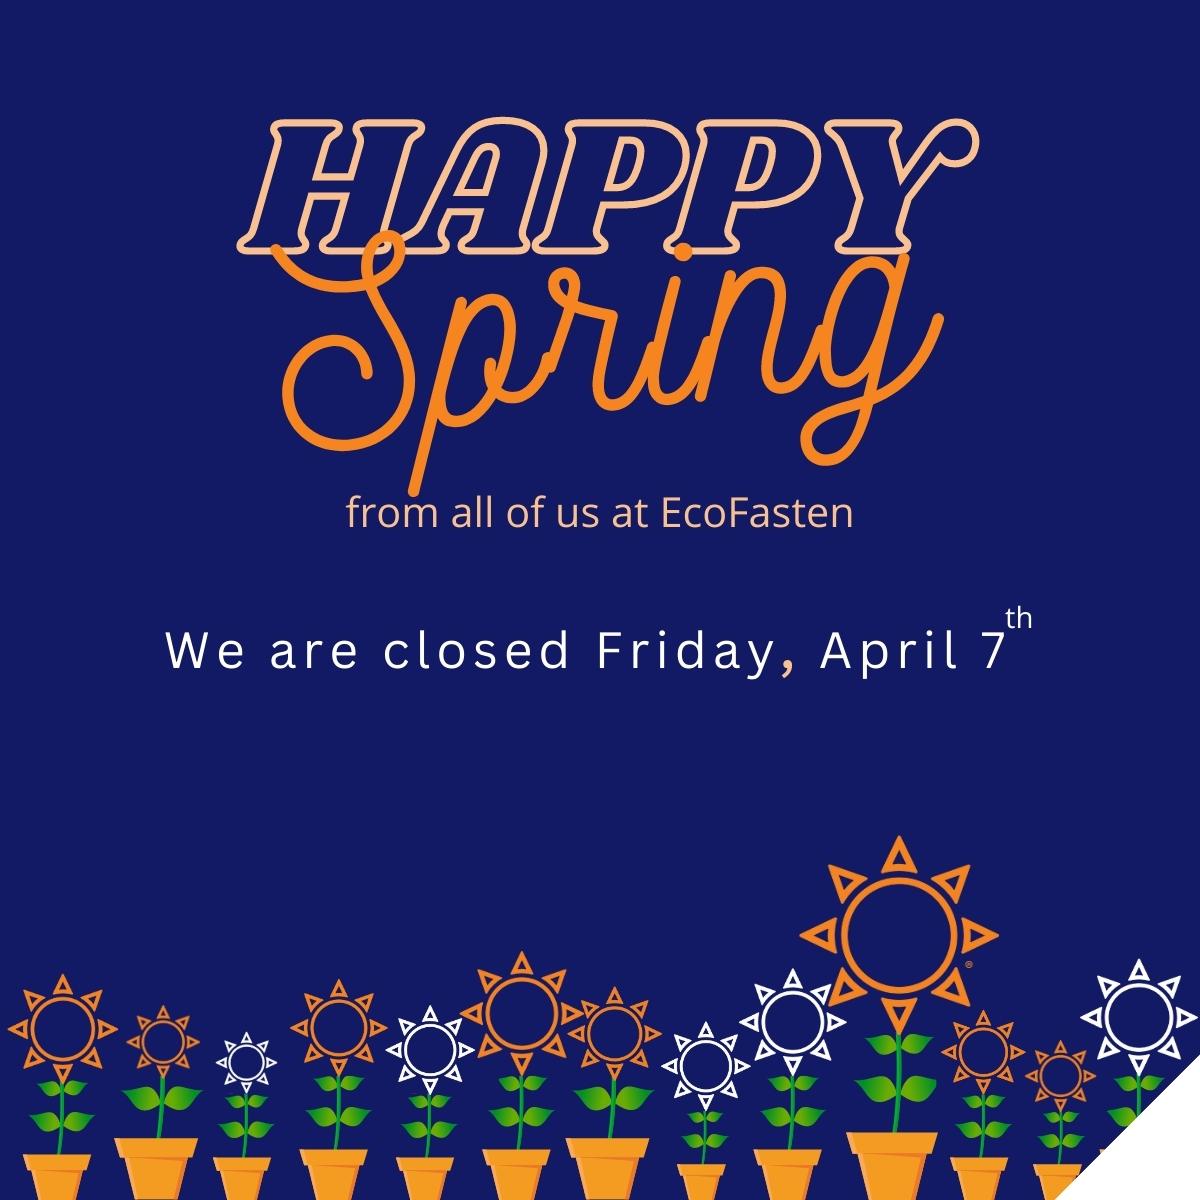 “Some old-fashioned things like fresh air & sunshine are hard to beat.” -Laura Ingalls Wilder

HAPPY SPRING FROM US TO YOU☀️🌱
To celebrate, we'll be closed Friday, April 7th
#Spring #FreshAir #Sunshine #HappySpring
#BuildingBrighterTomorrows #EcoFasten #ForInstallersByInstallers